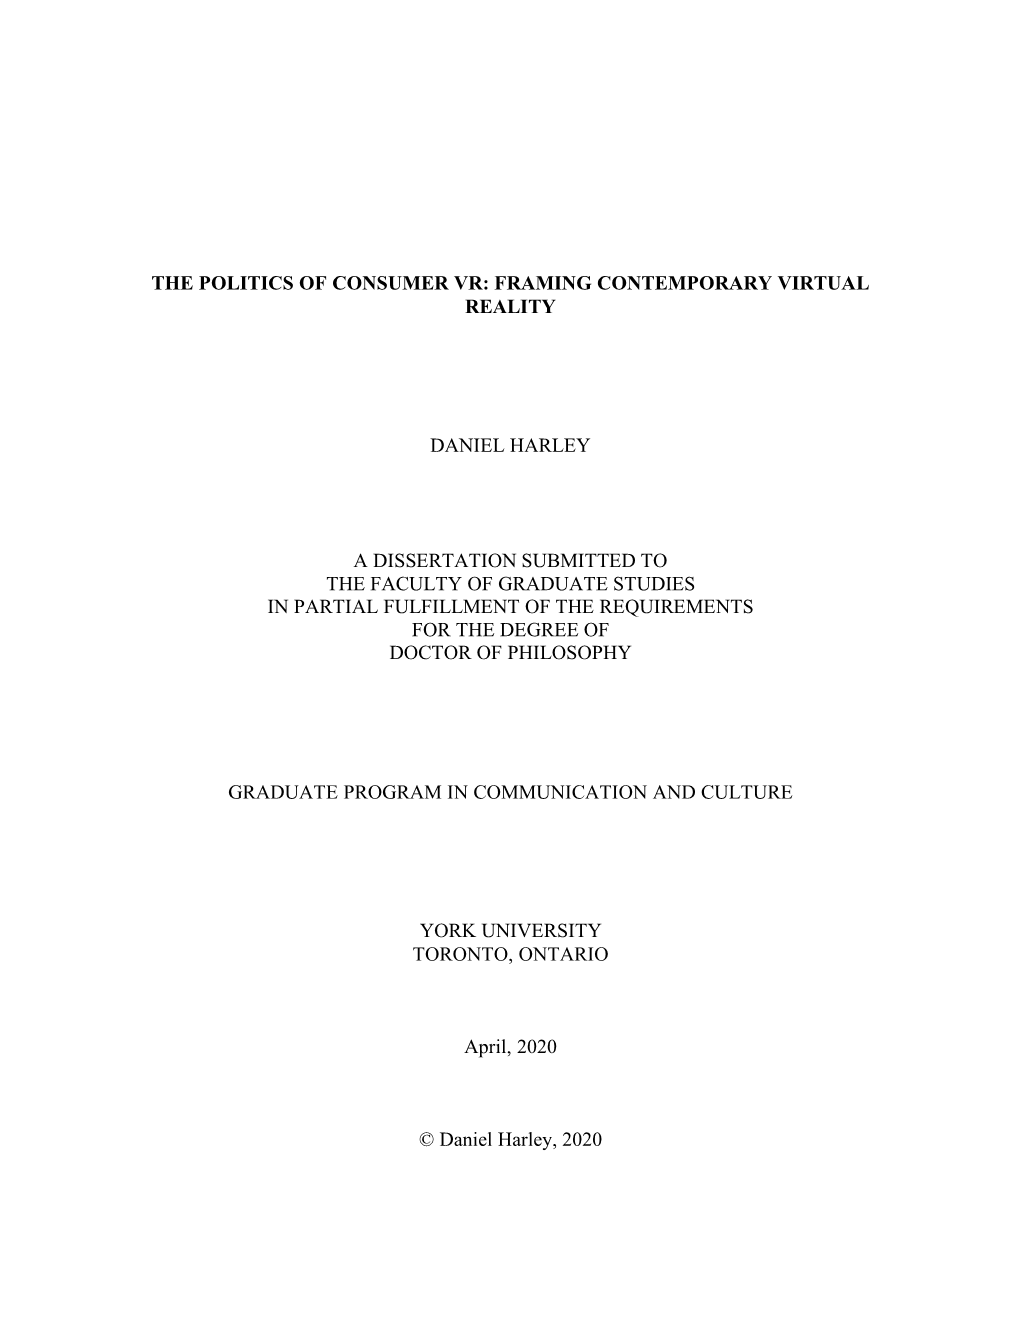 The Politics of Consumer Vr: Framing Contemporary Virtual Reality Daniel Harley a Dissertation Submitted to the Faculty of Gradu